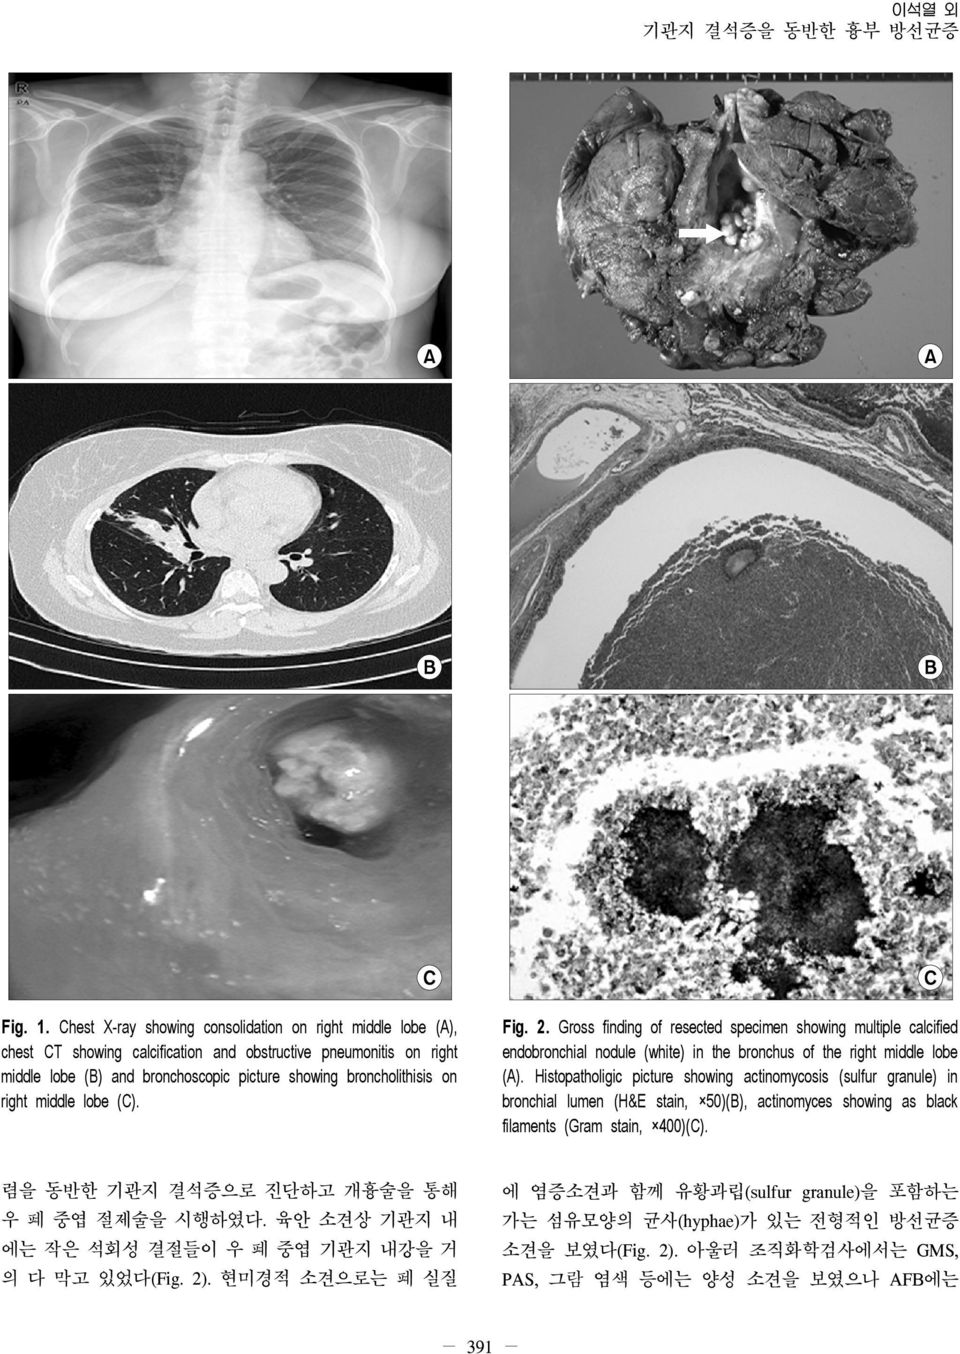 right middle lobe (C). Fig. 2. Gross finding of resected specimen showing multiple calcified endobronchial nodule (white) in the bronchus of the right middle lobe (A).